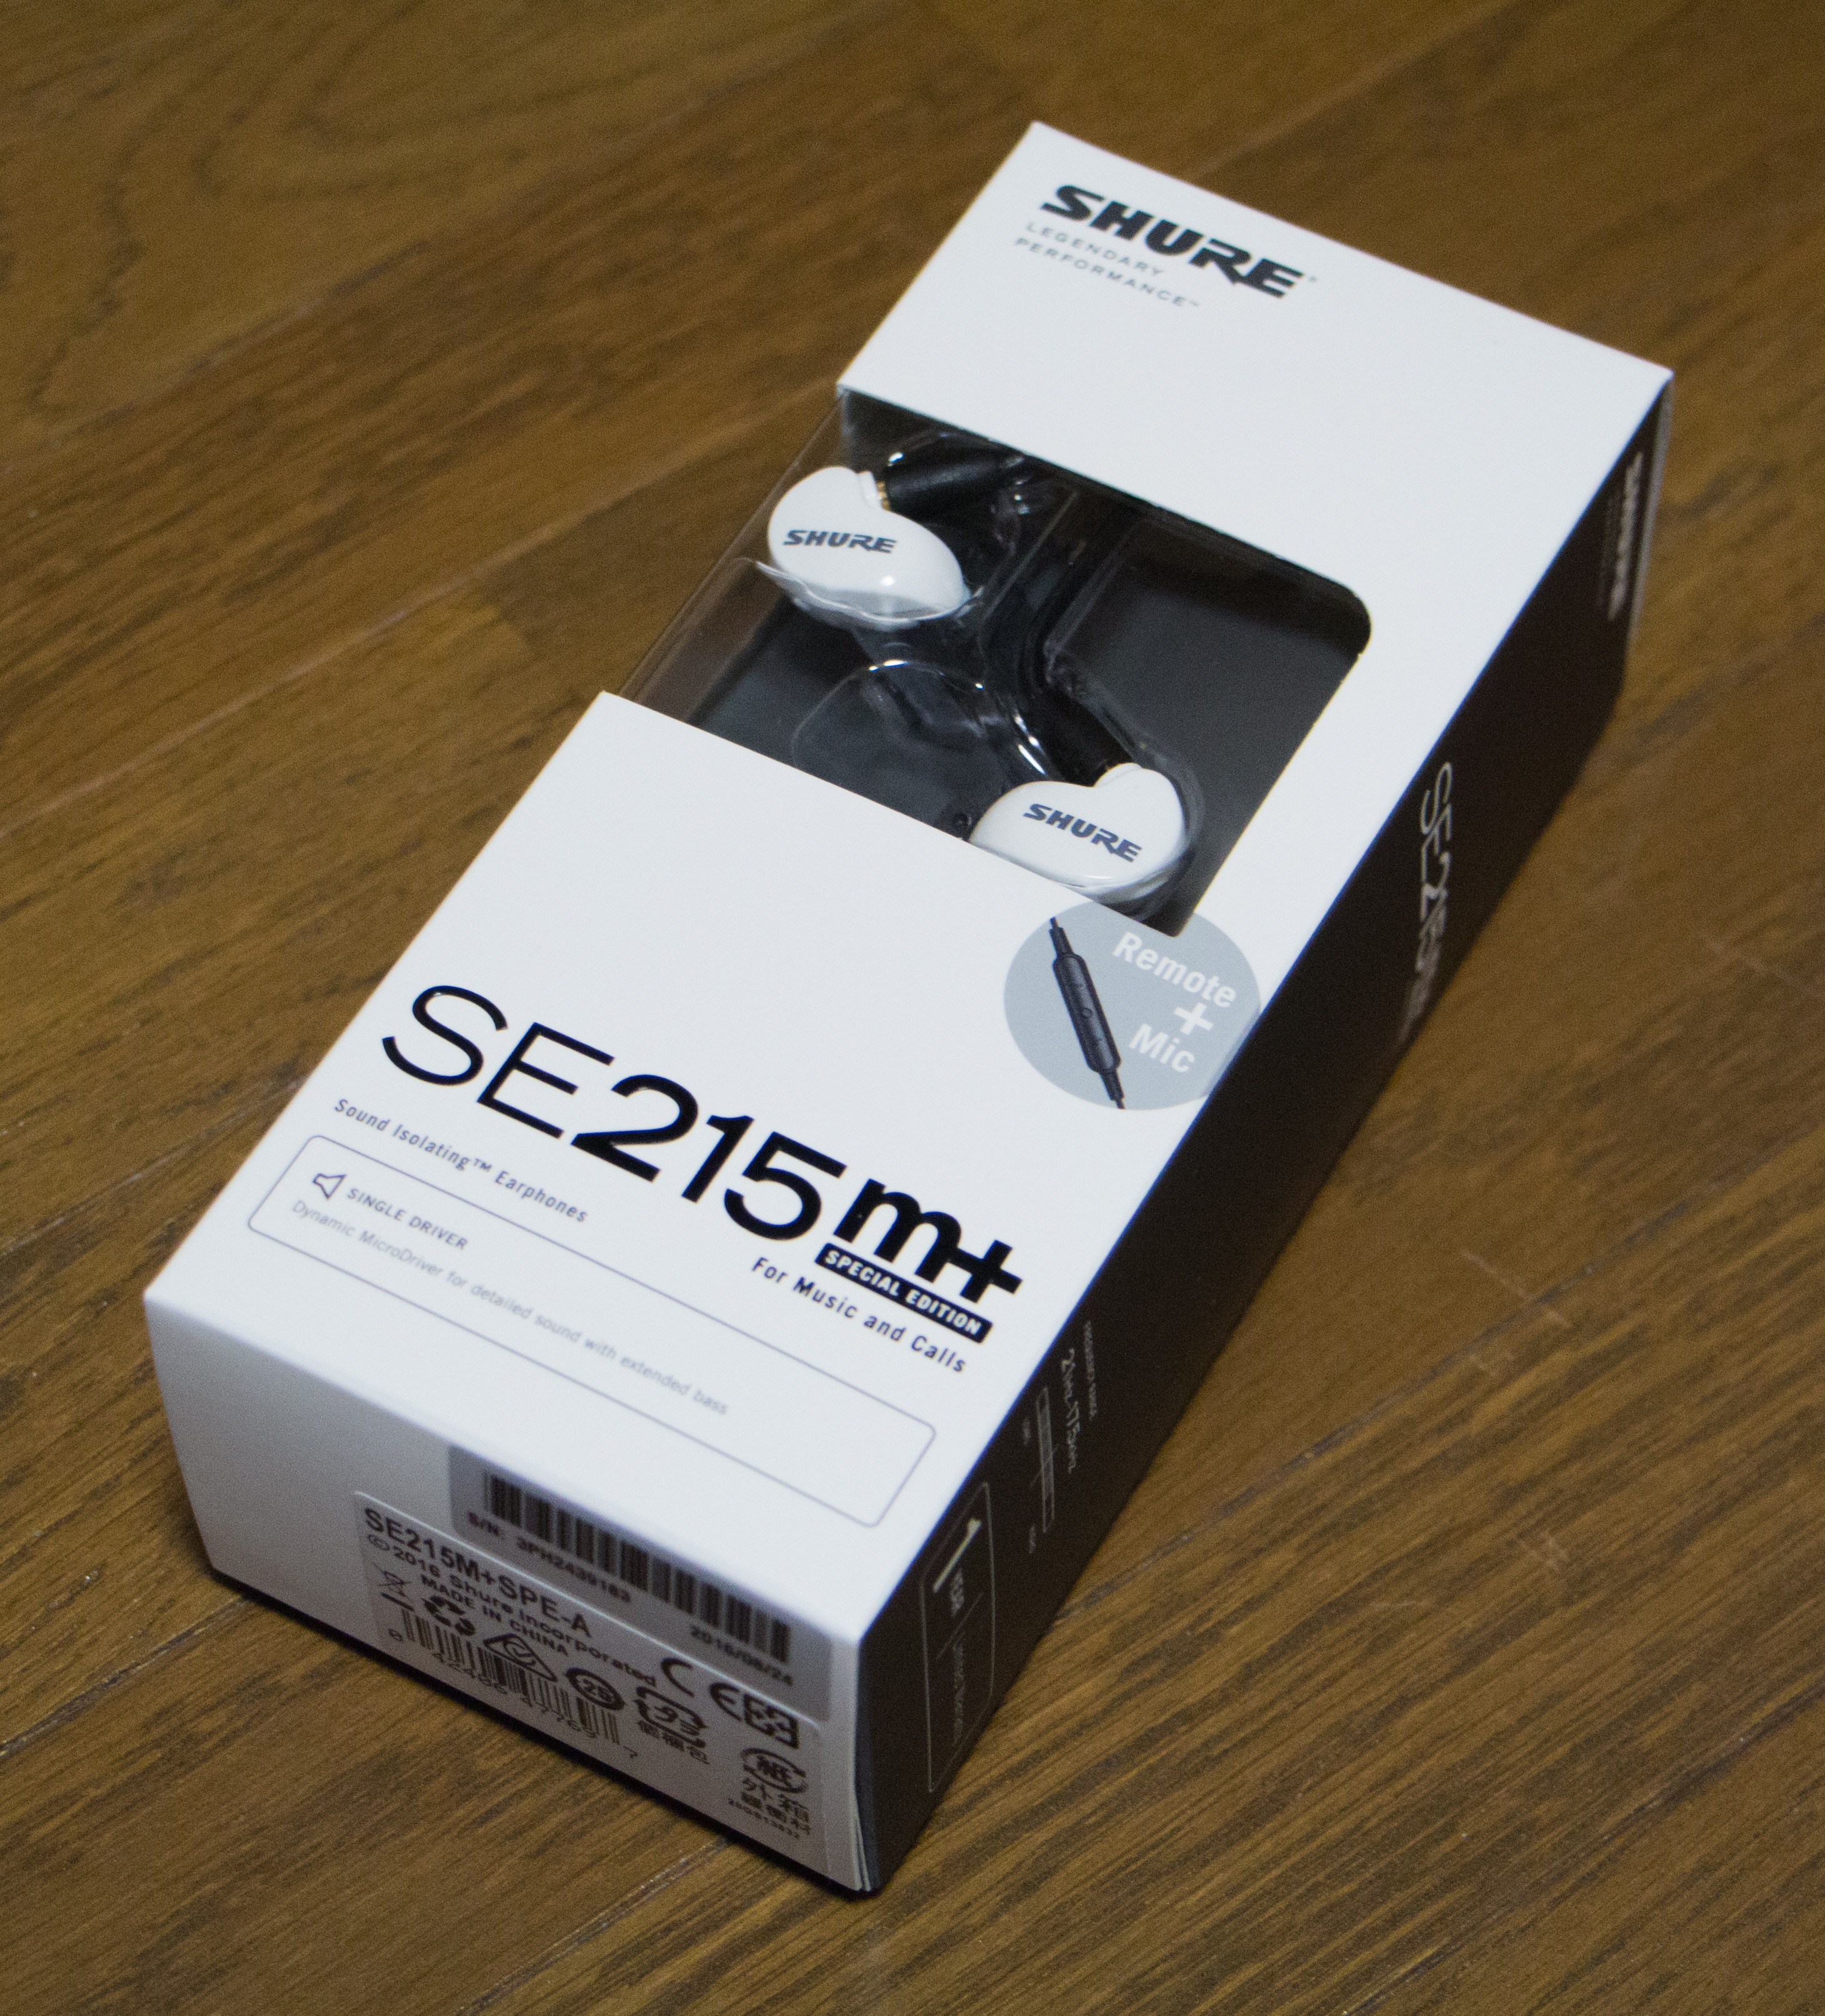 SHURE SE215m + Special Edition